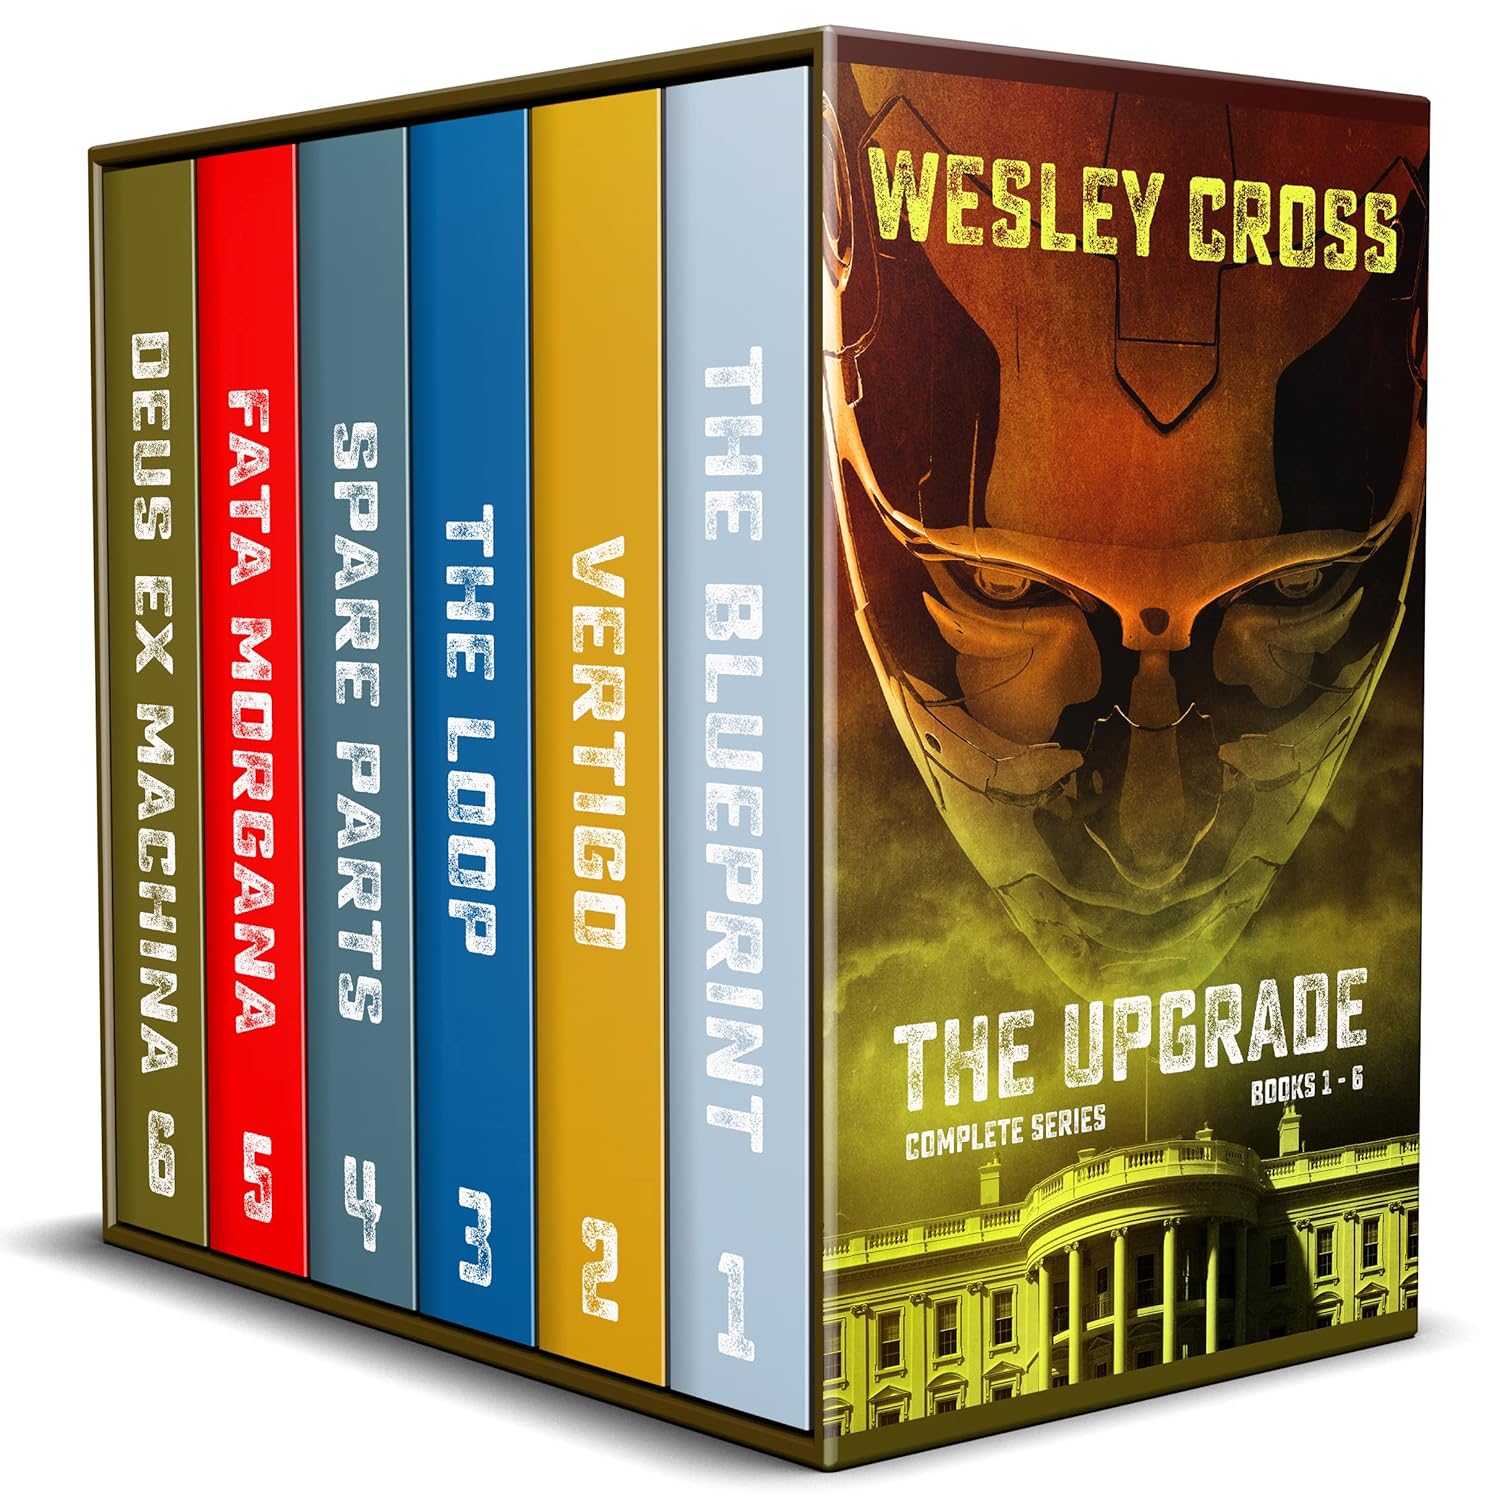 The Upgrade: Complete series: Books 1 - 6 are free on Amazon Kindle